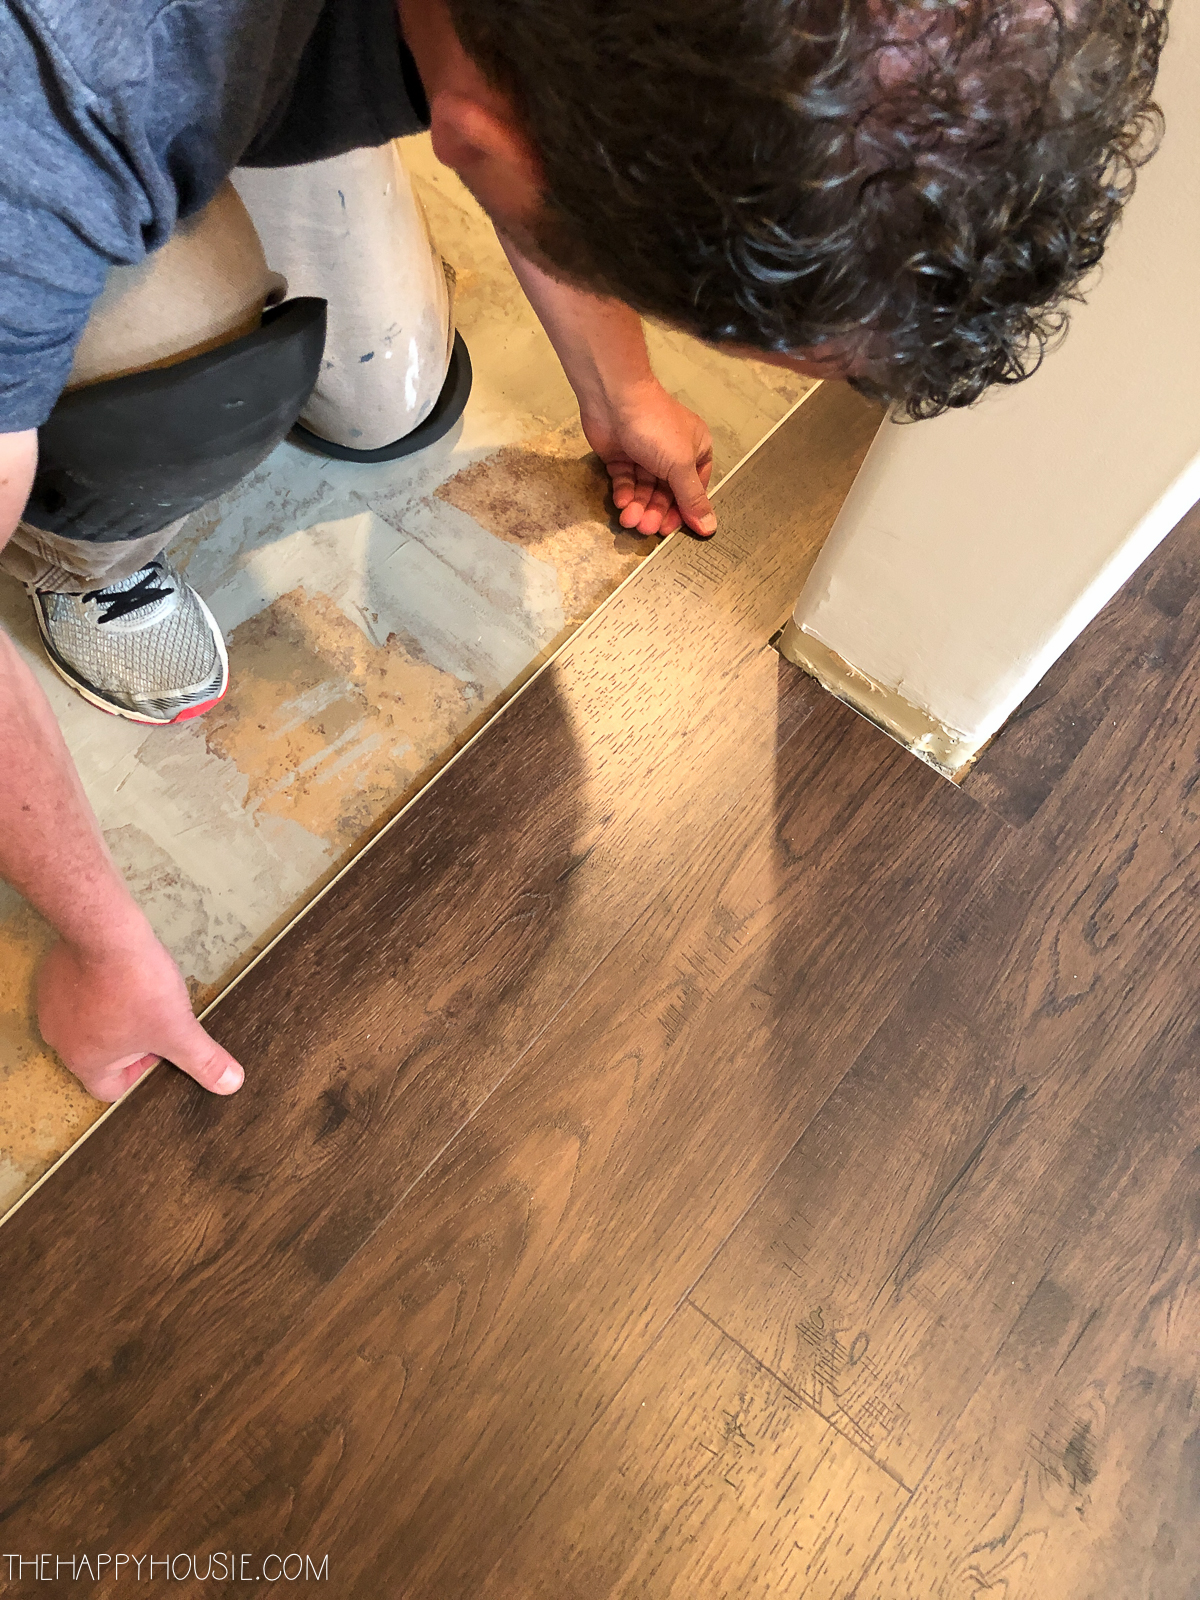 Install Vinyl Plank Over Tile Floors, What Is The Best Flooring To Lay Over Ceramic Tile